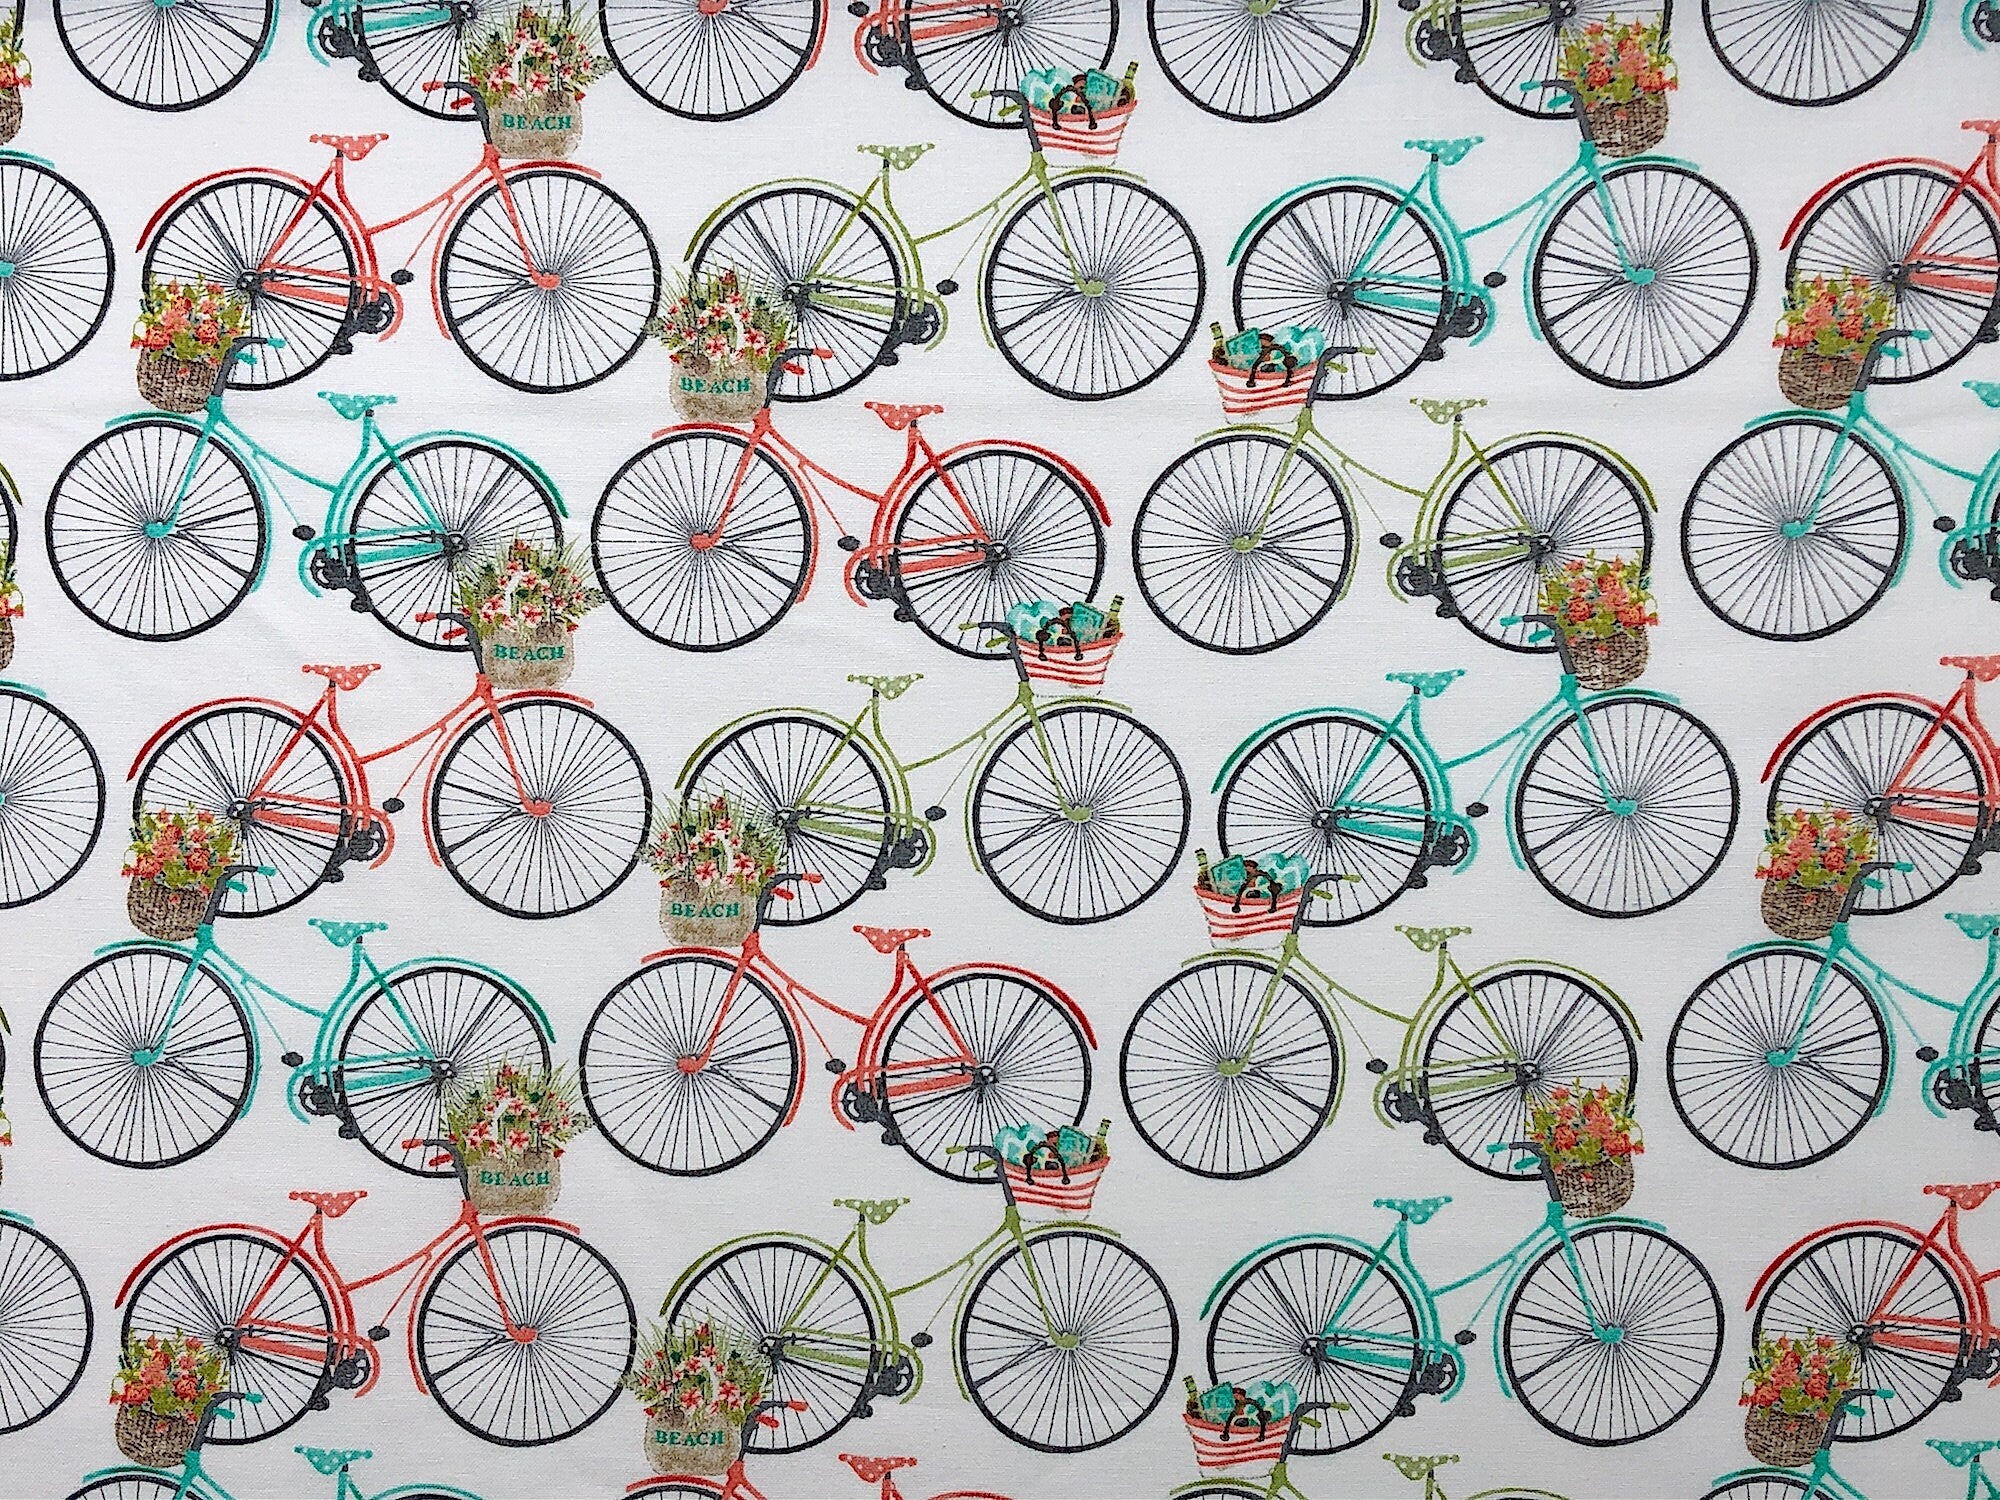 This nautical fabric is covered with teal, peach and green bicycles. The bicycles have baskets that say beach on them and the baskets are filled with flowers. This fabric is part of the Beach Travel Collection by Beth Albert.